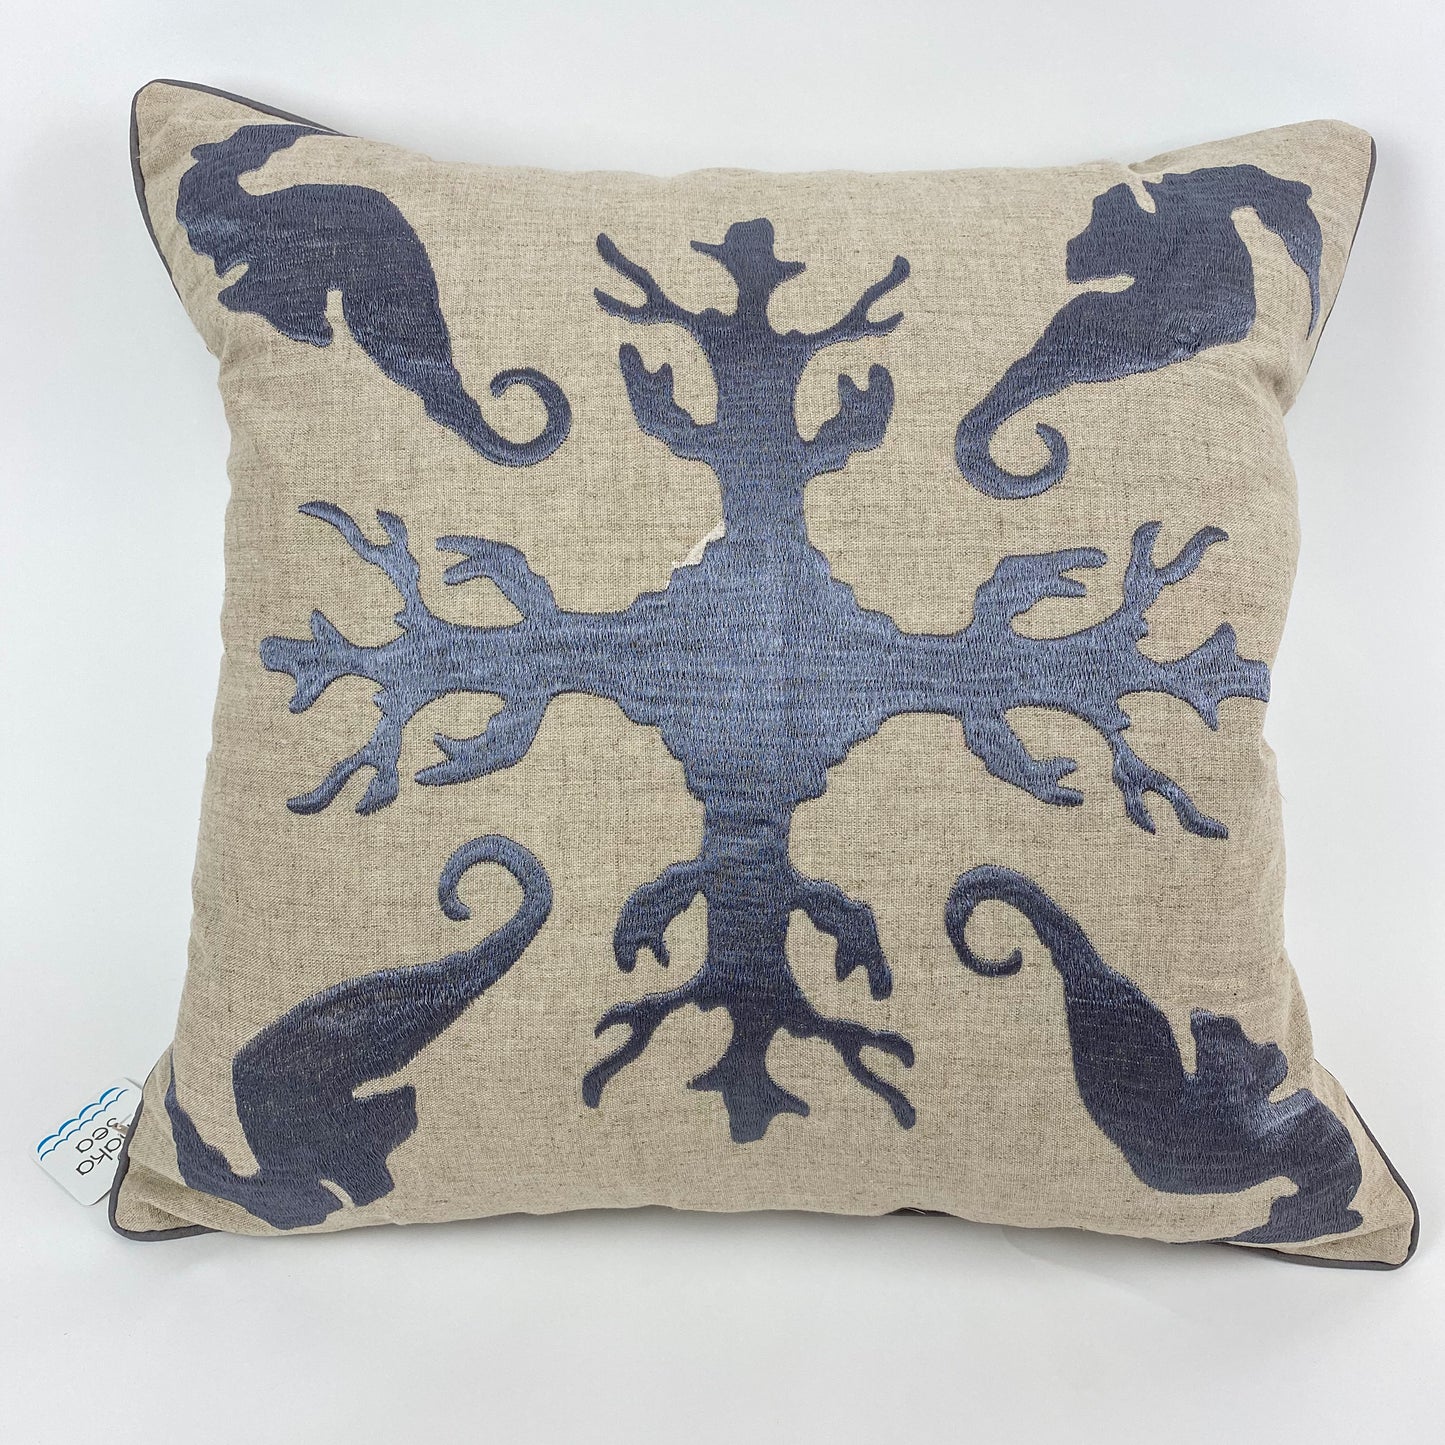 Lanikai Square Embroidered Pillow Cover | Seahorse | Various Embroidery Colors